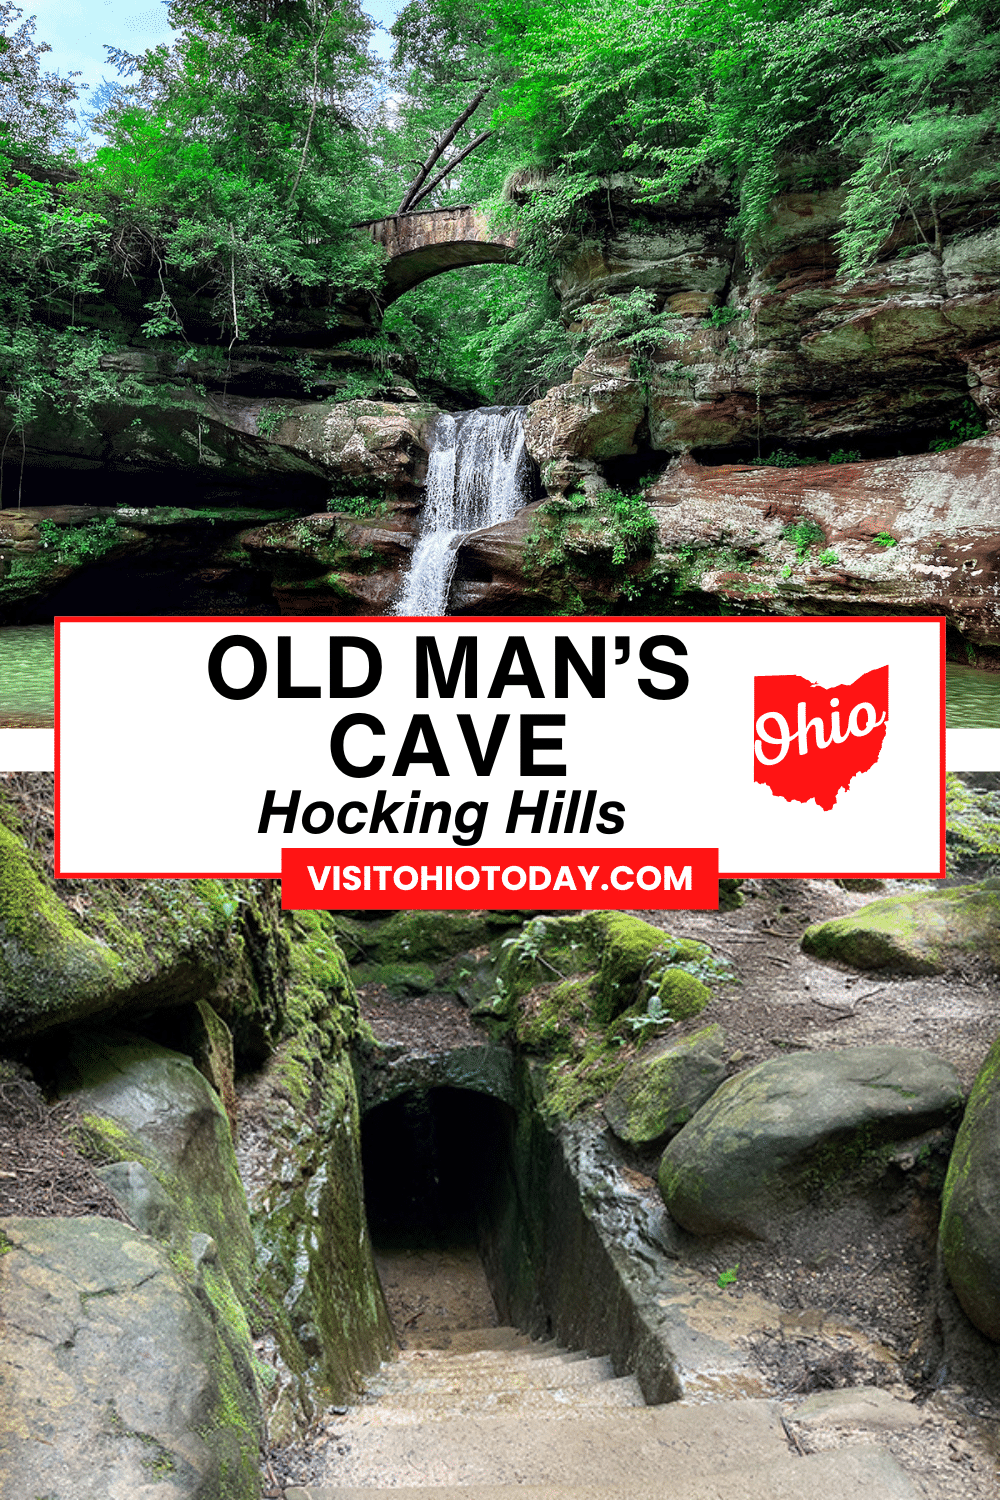 Old Man´s Cave travels through an amazing gorge, that is cut through a 150-foot thickness of Blackhand sandstone.